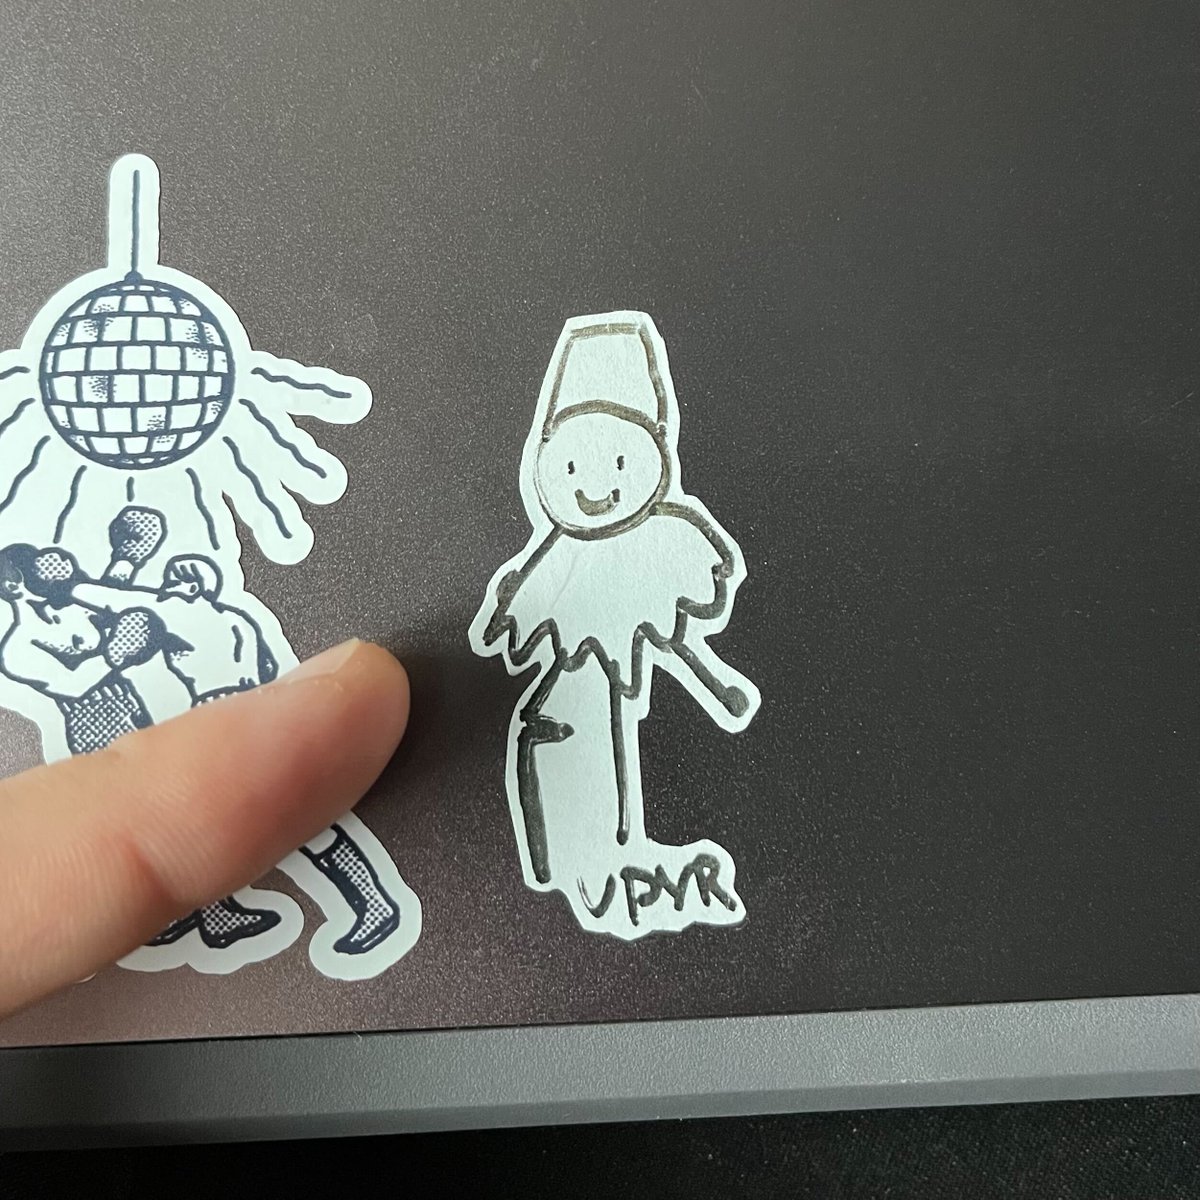 What do you mean no more thaumaturge doodles at work? We've made a bunch of #TheThaumaturge doodles and even turned some of them into stickers 😏